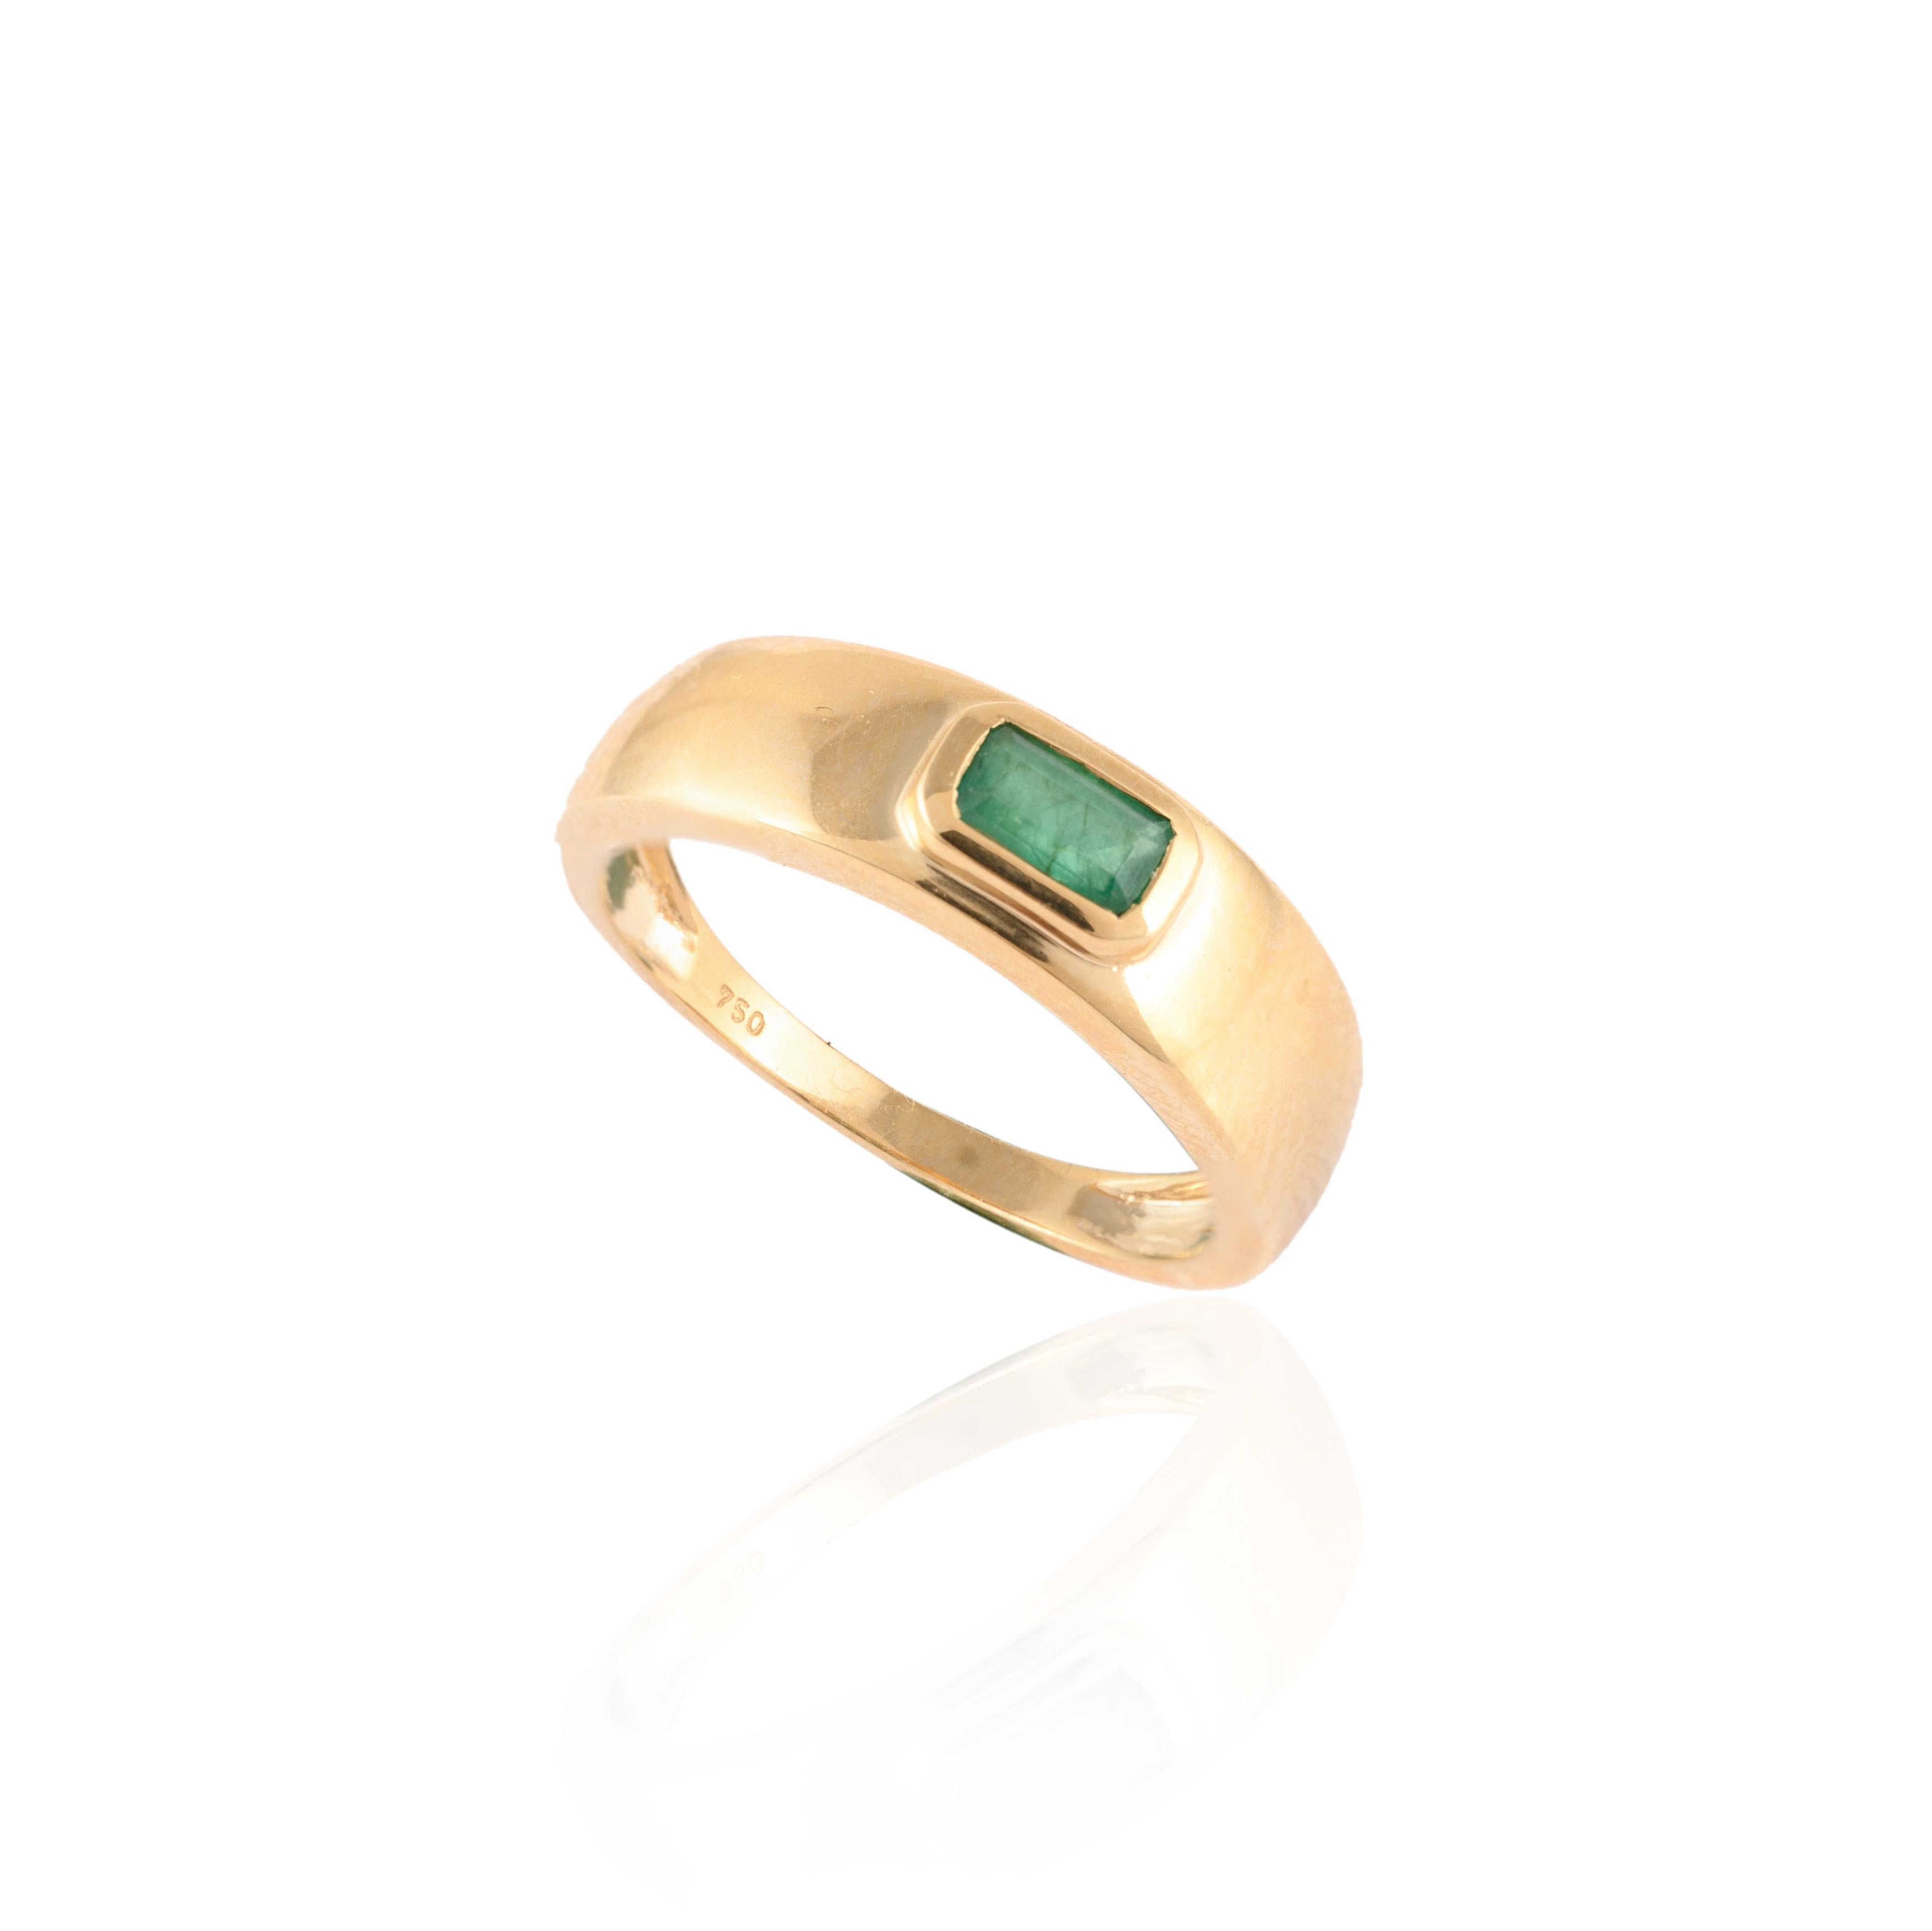 For Sale:  Unisex 18 Karat Solid Yellow Gold Natural Baguette Cut Emerald Ring 8